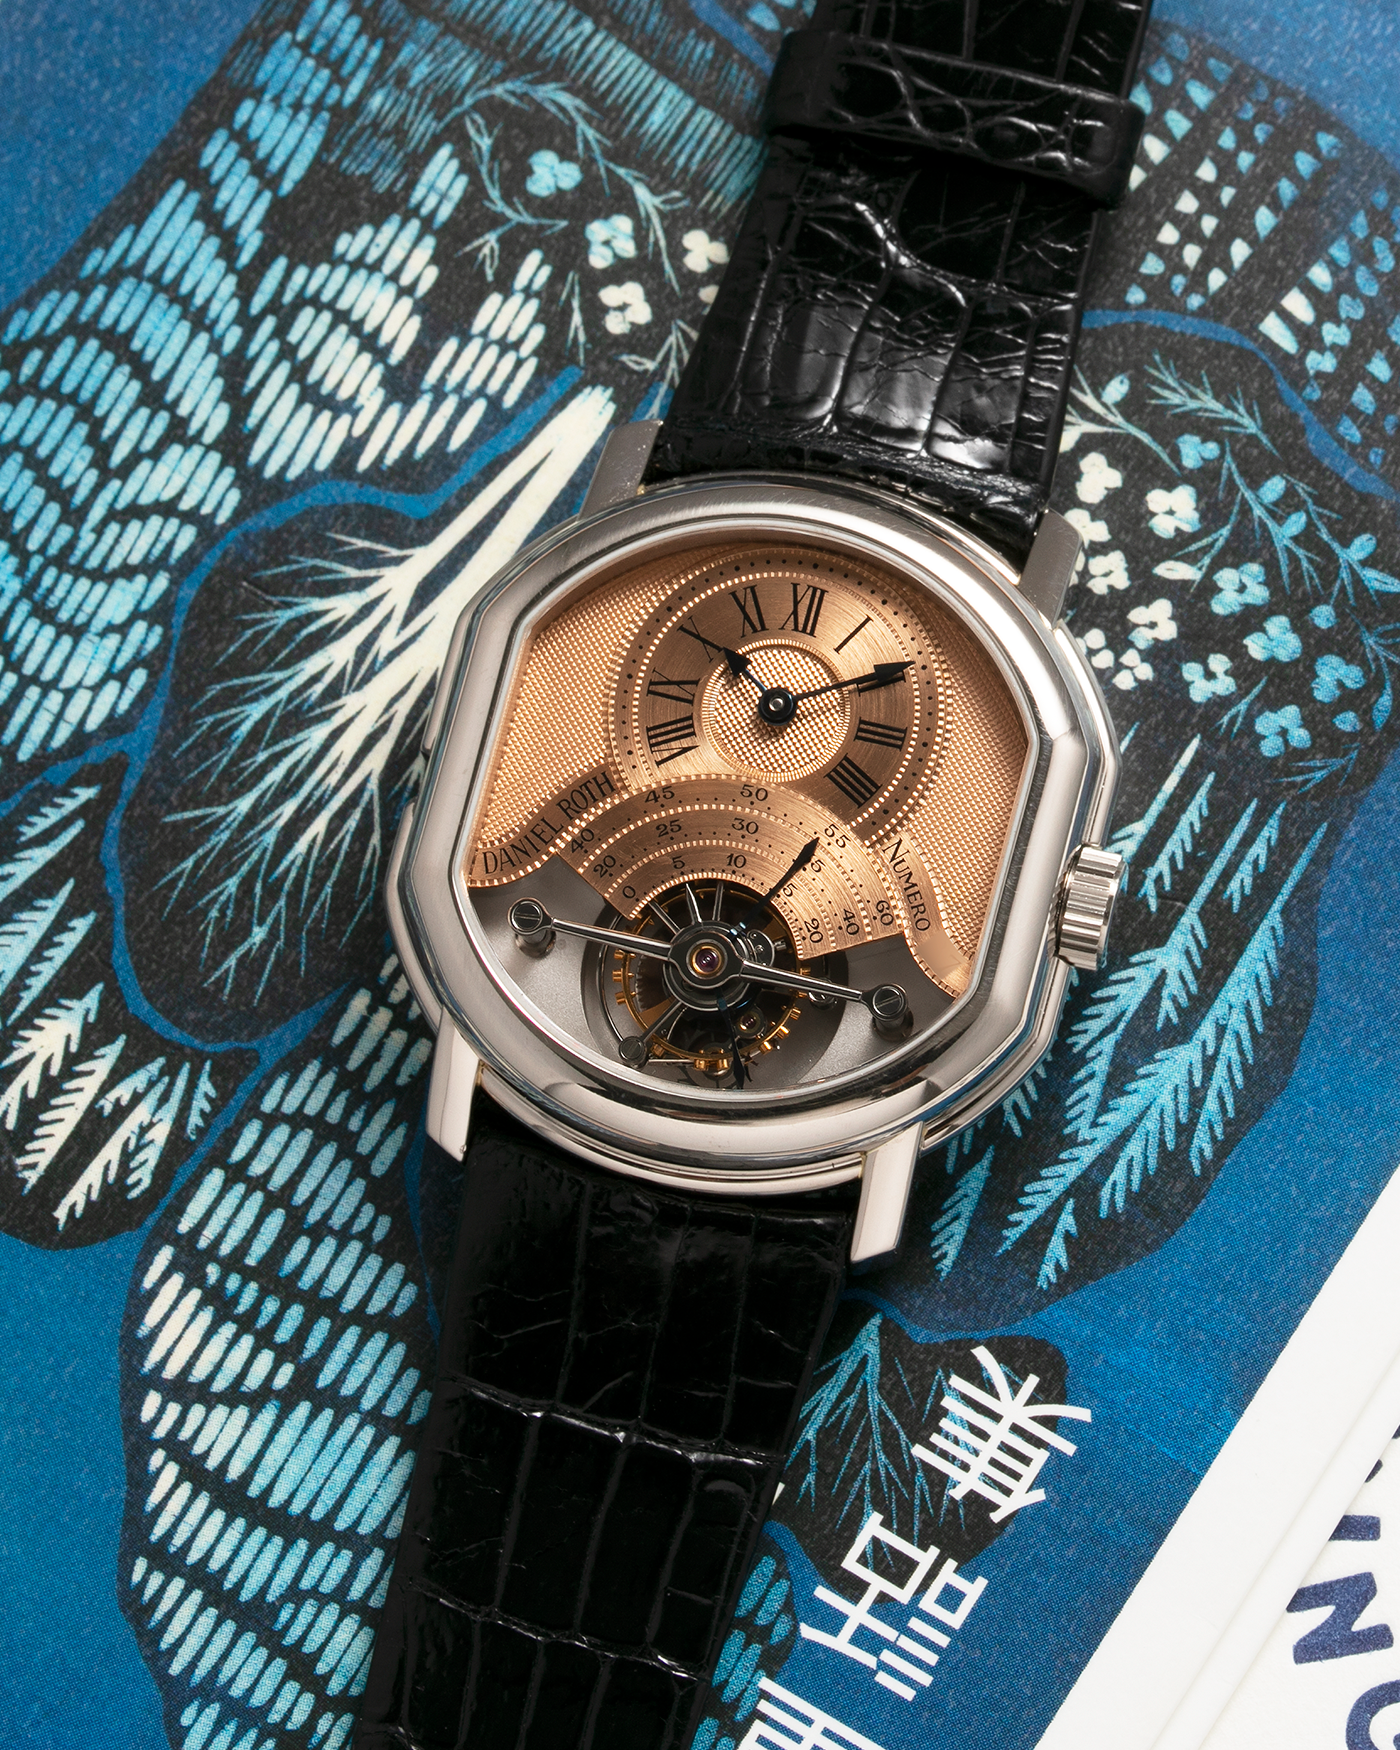 Brand: Daniel Roth Year: 1990’s Model: 2187 Tourbillon (Possibly Piece Unique) Material: 18-Carat White Gold  Movement: Cal. DR 307 One-Minute Tourbillon Regulator, Manual-Winding  Case Diameter: 35mm x 38mm Strap: Daniel Roth Black Alligator Leather with Signed 180carat White Gold Tang Buckle